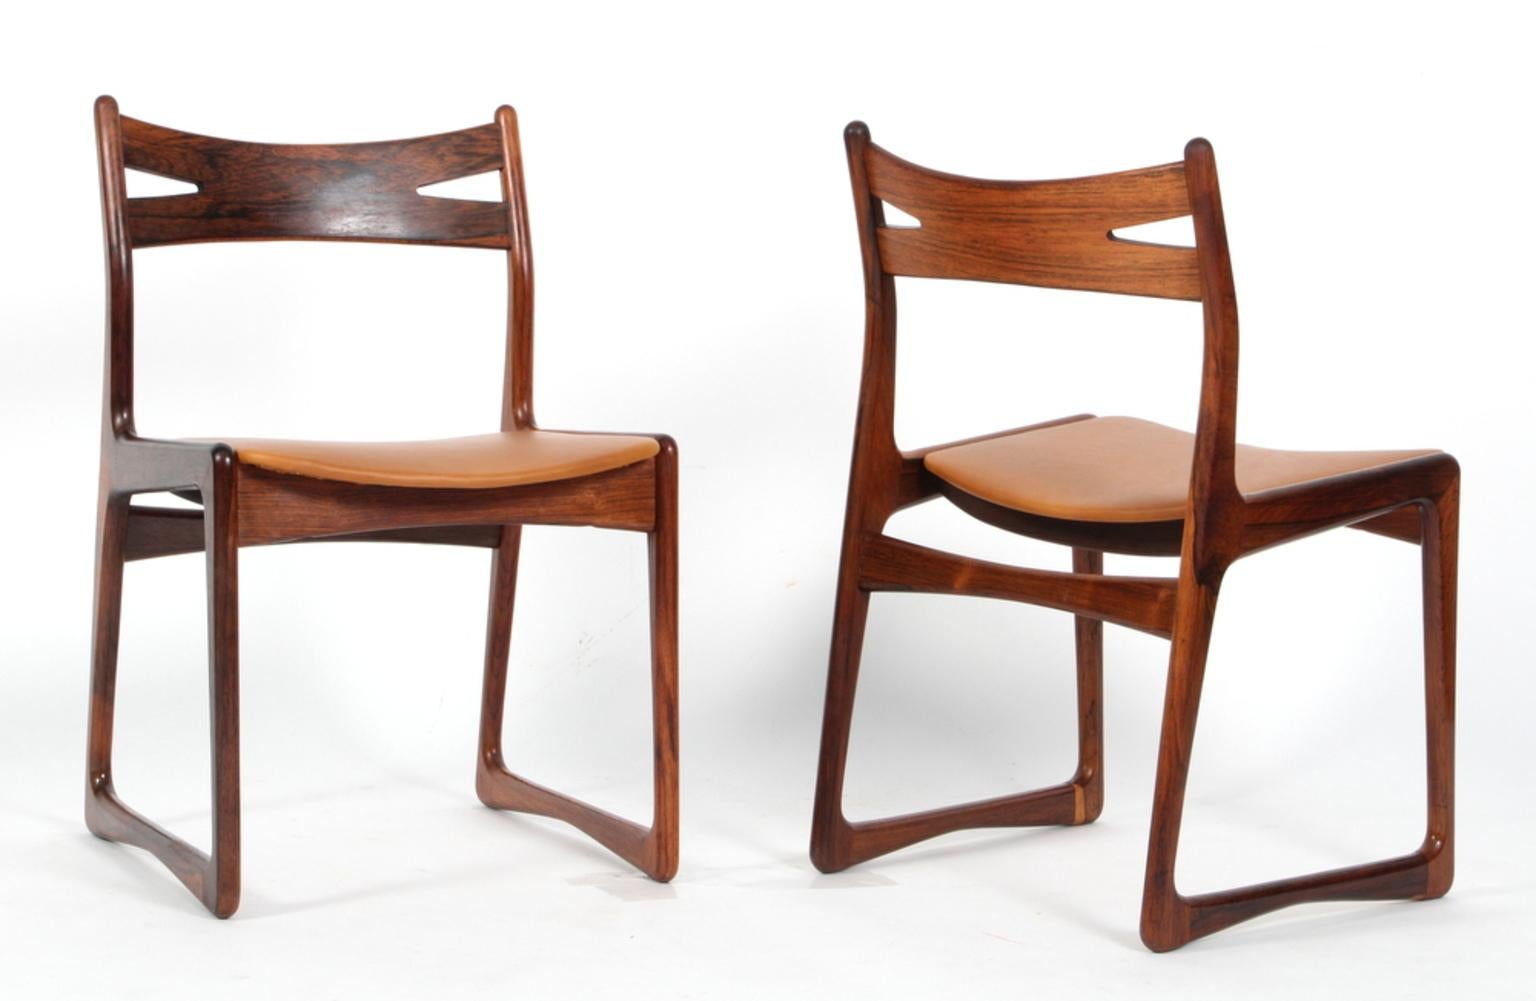 Danish cabinetmaker set of eight dining chairs new upholstered with silk aniline leather.

Frame of partly massive rosewood.

Backrest in style of Hans Wegner's Savbuk.